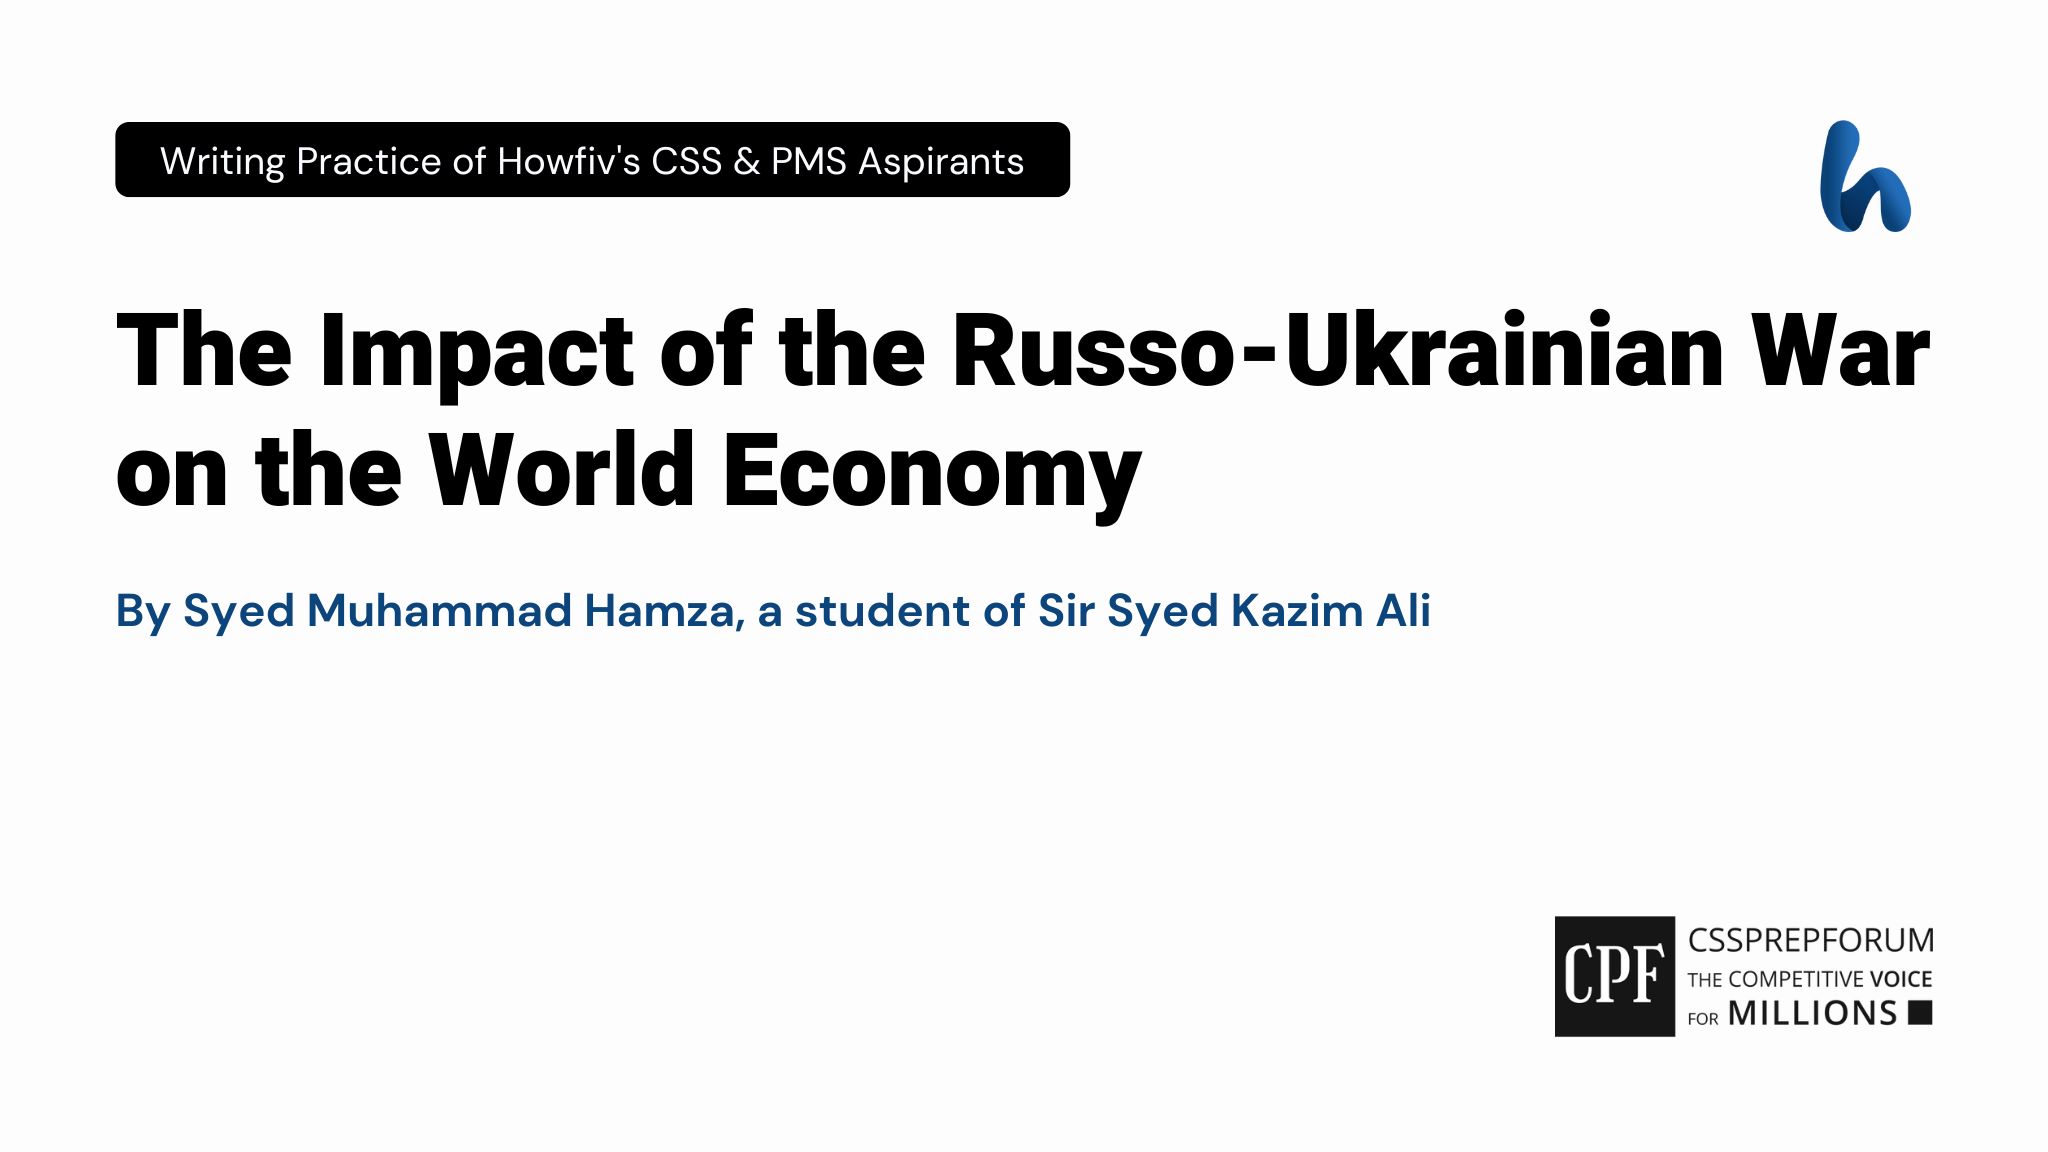 The Impact of the Russo-Ukrainian War on the World Economy